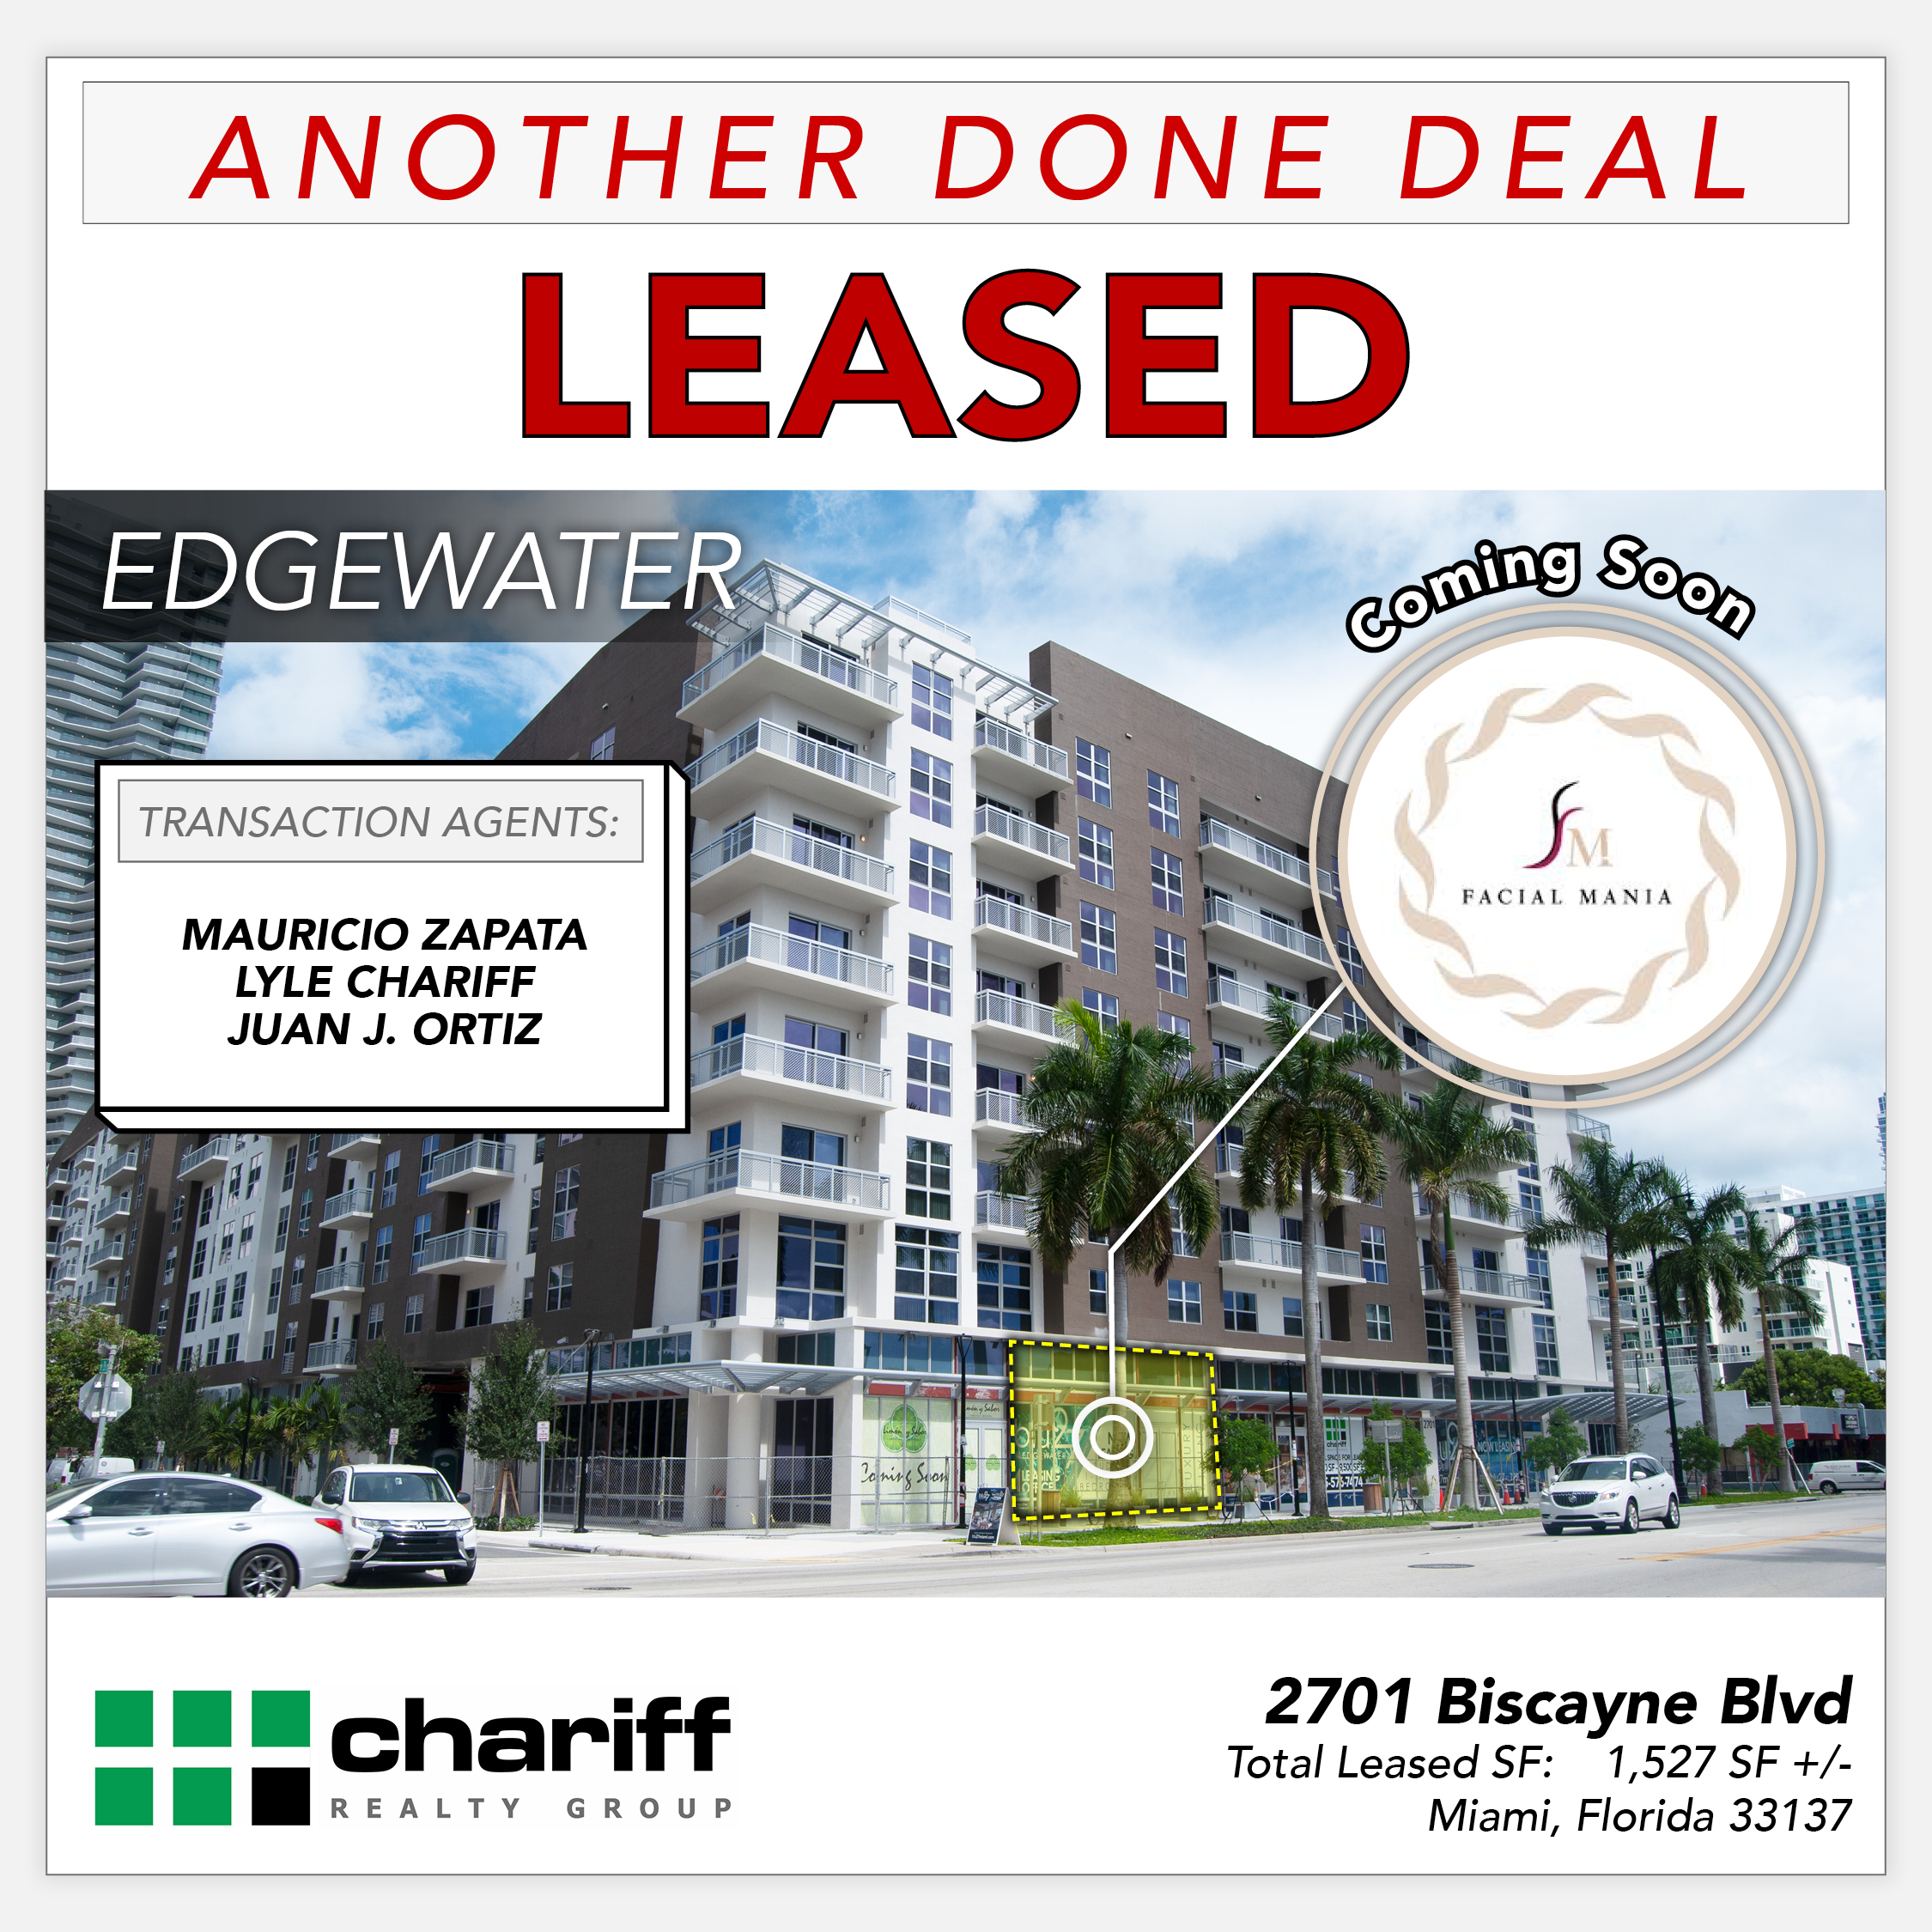 2701 Biscayne Blvd 2- Another Done Deal - Leased - Edgewater - Miami-Florida-33137-Chariff Realty Group